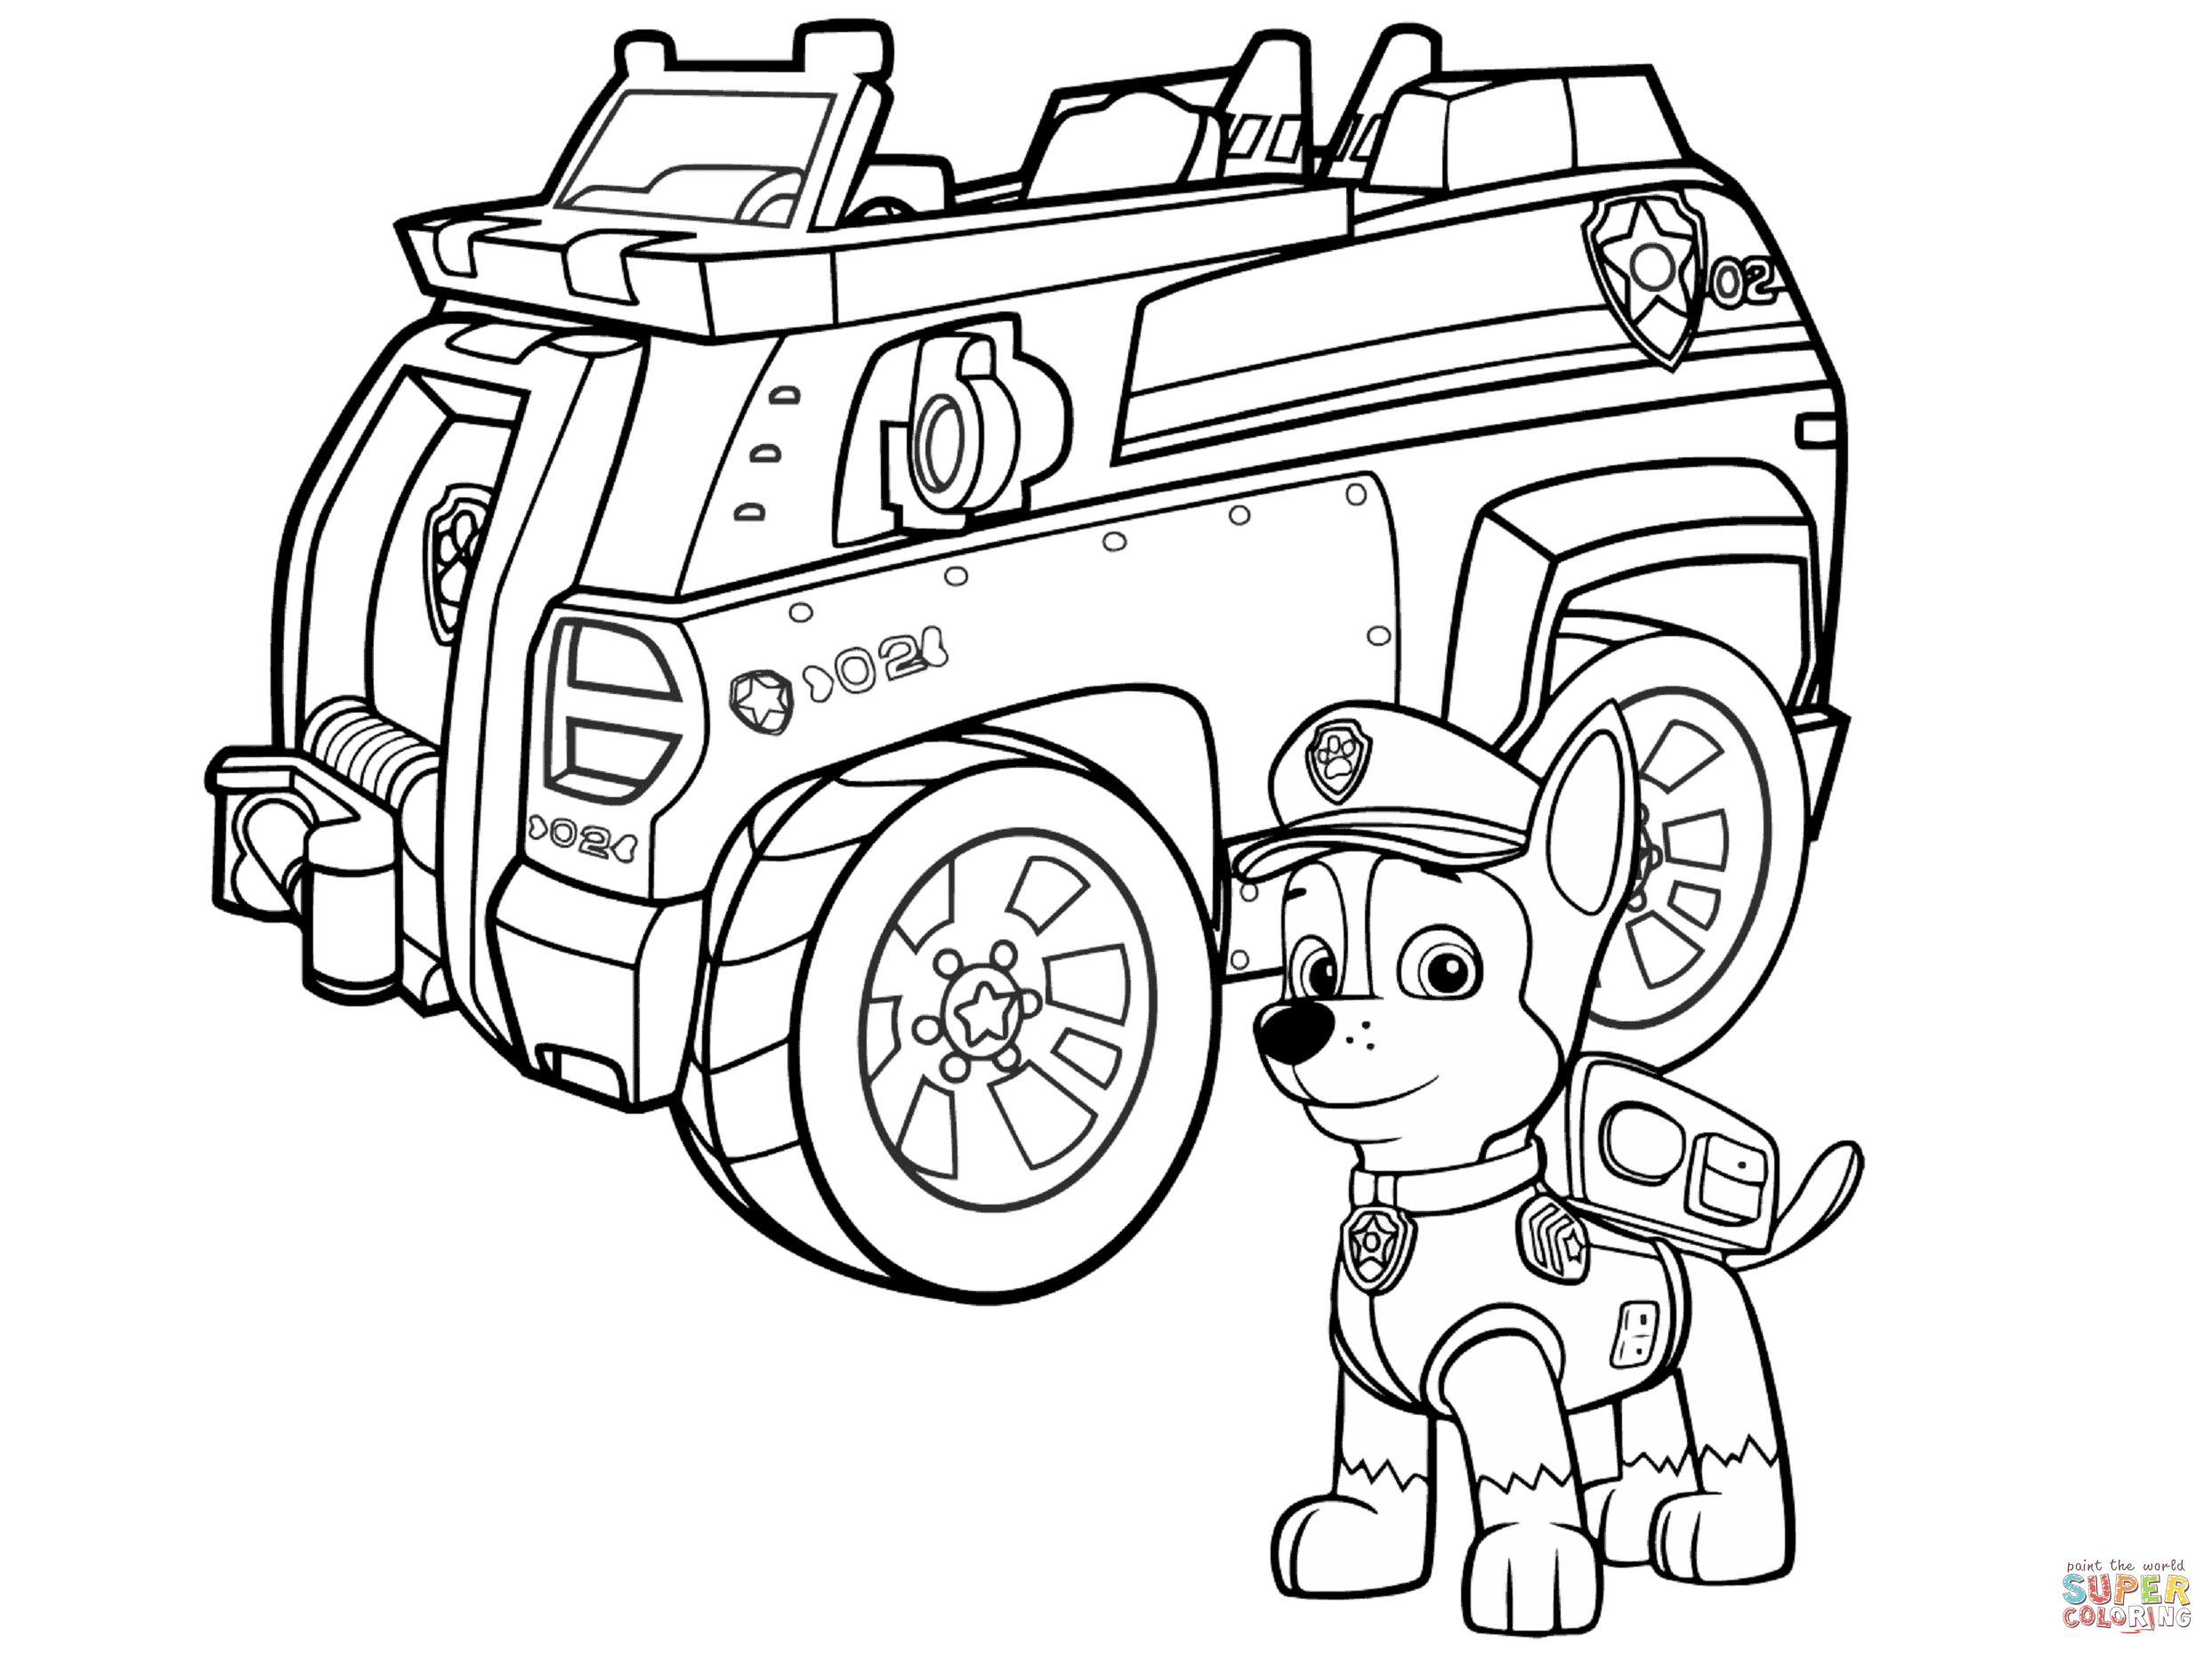 chase paw patrol coloring page